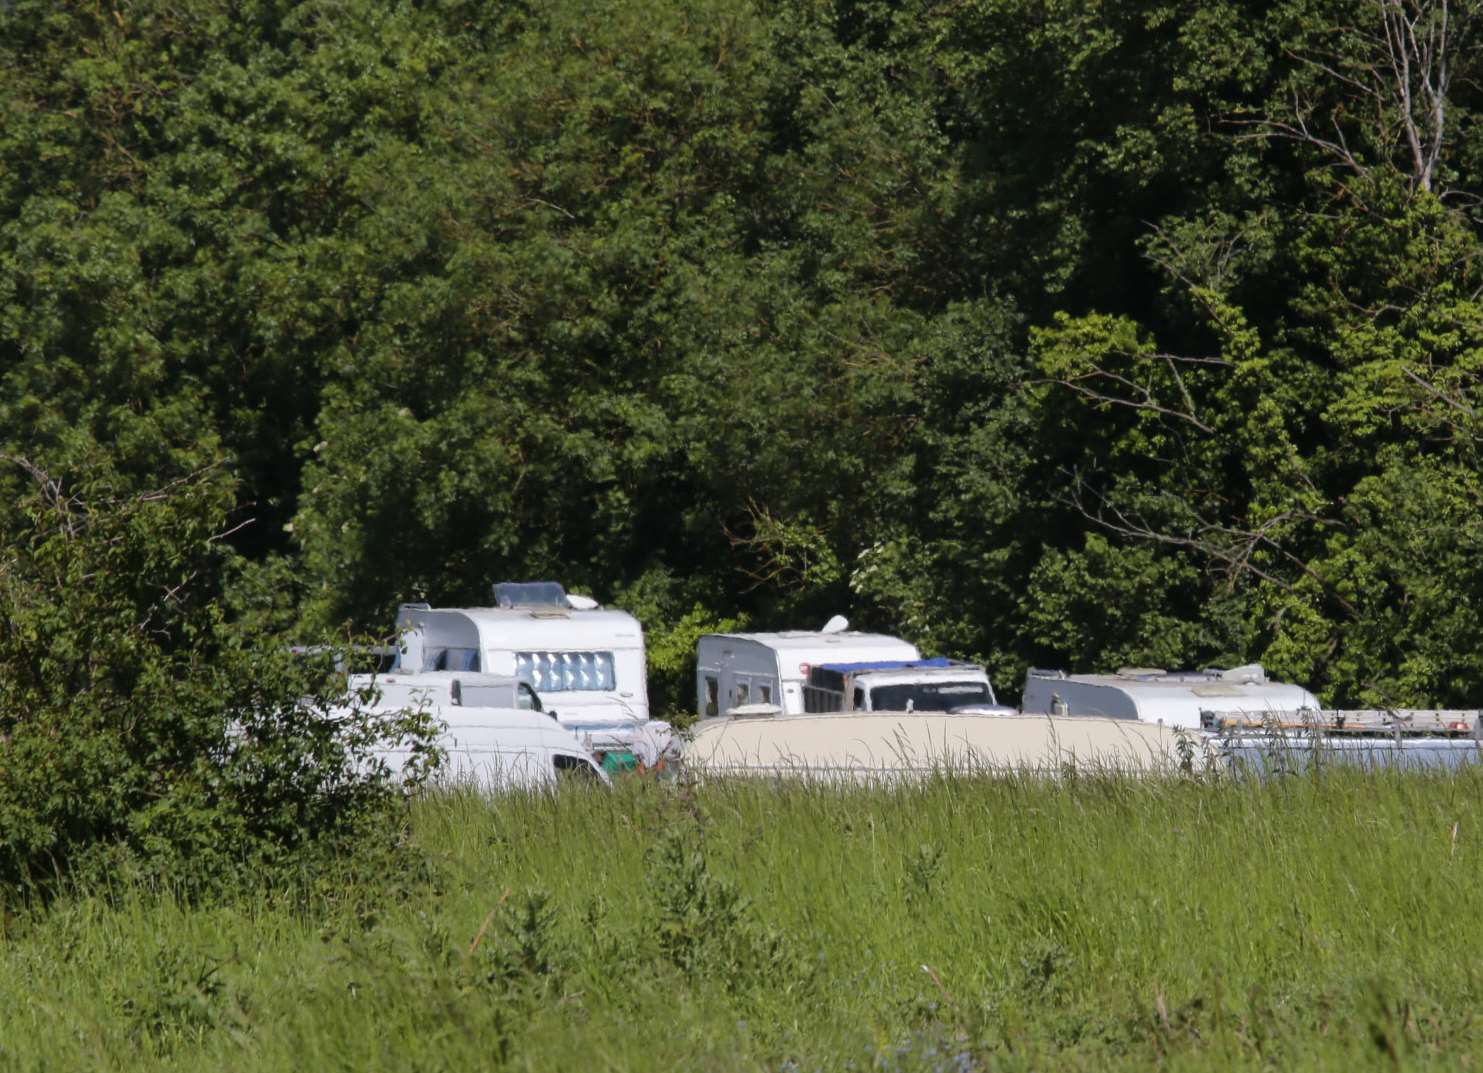 Travellers on the site